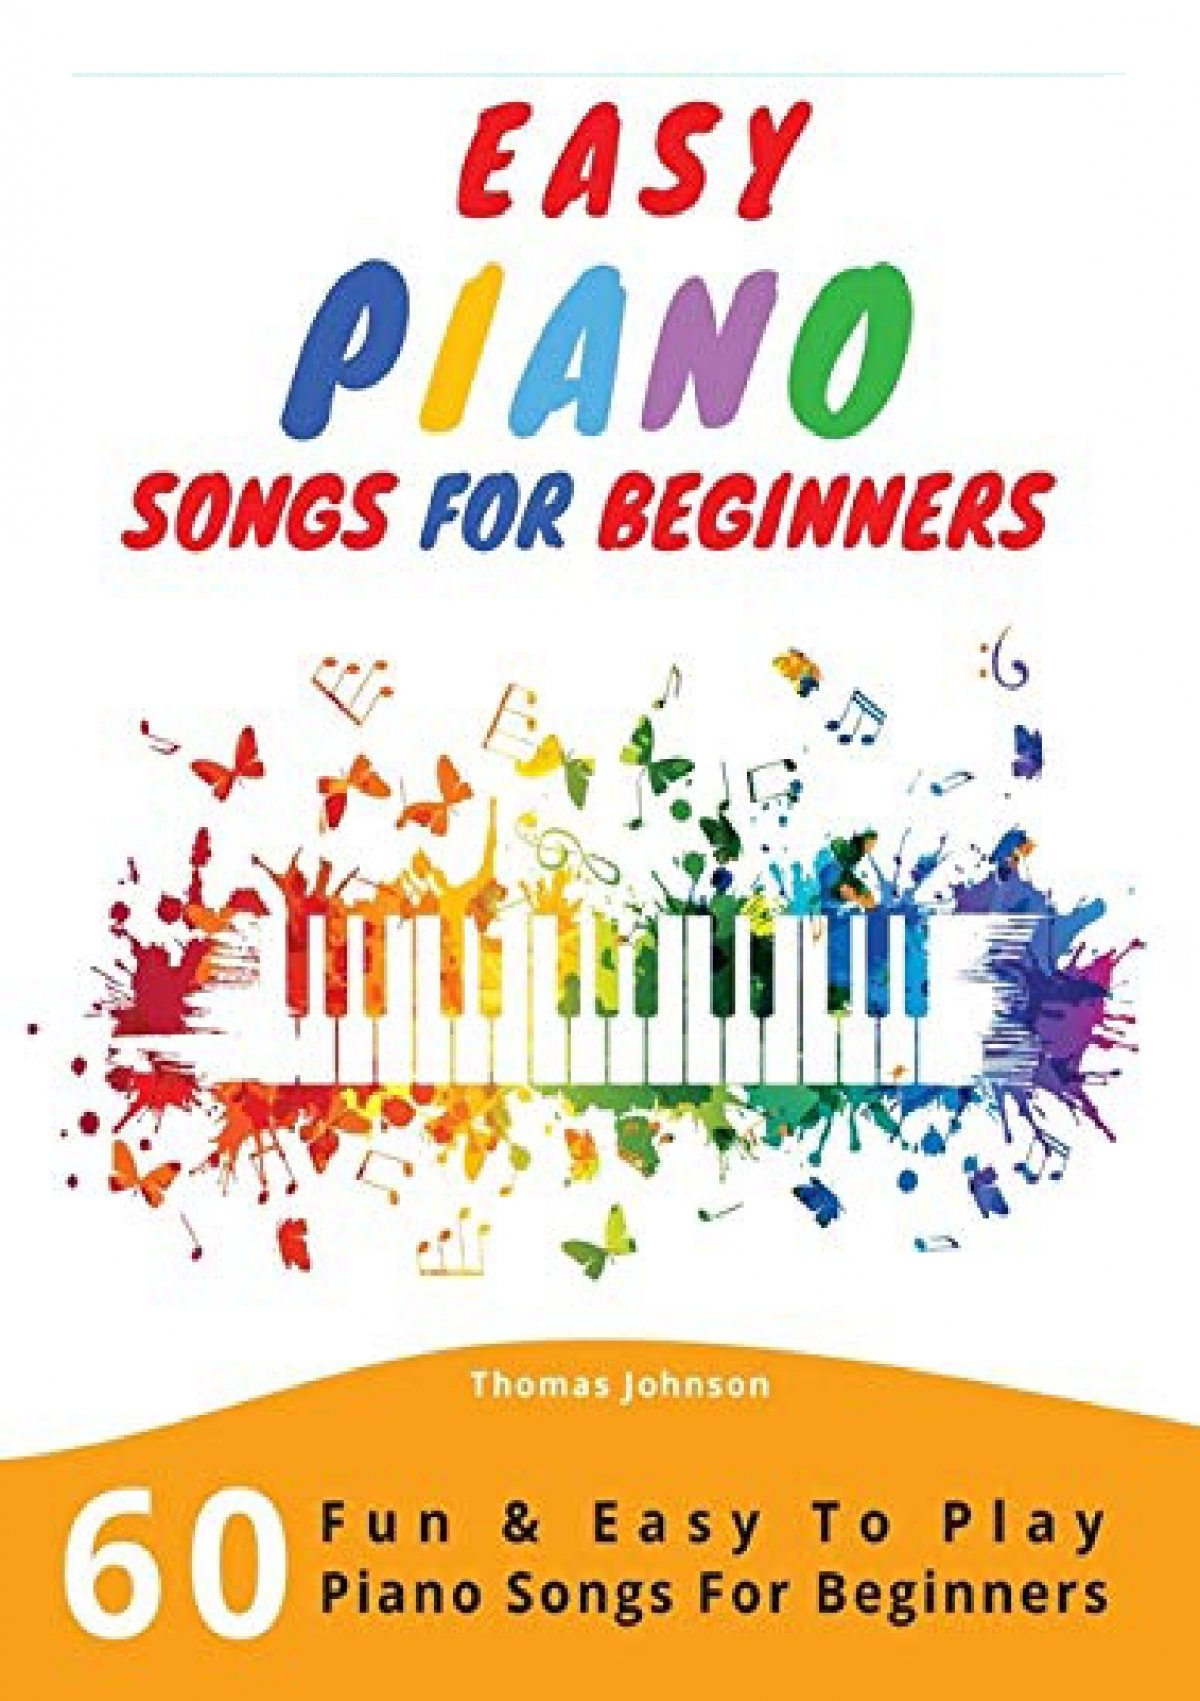 download-easy-piano-songs-for-beginners-60-fun-easy-to-play-piano-songs-for-beginners-android